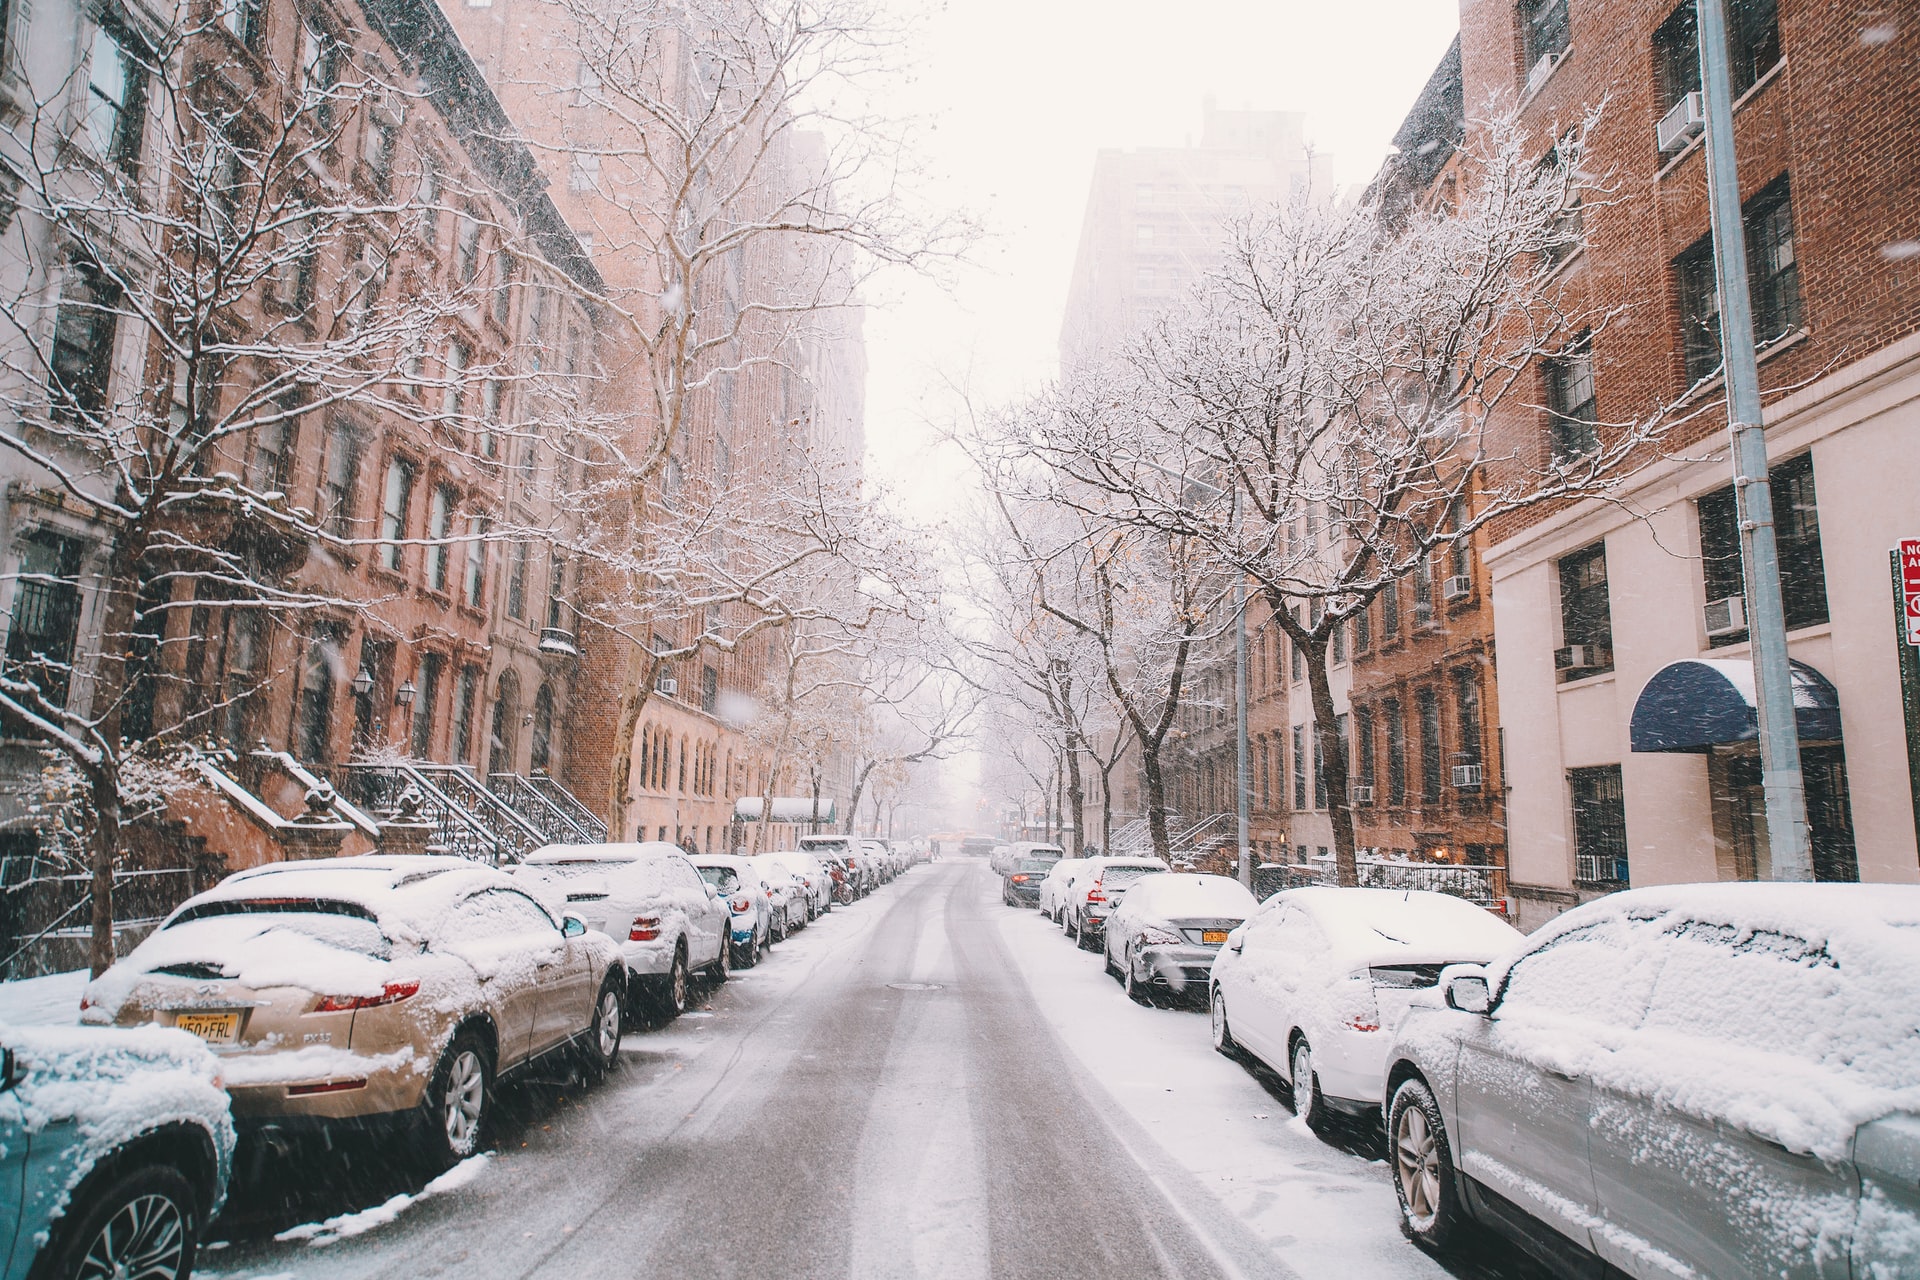 Winter season safety tips for moving truck drivers in NYC